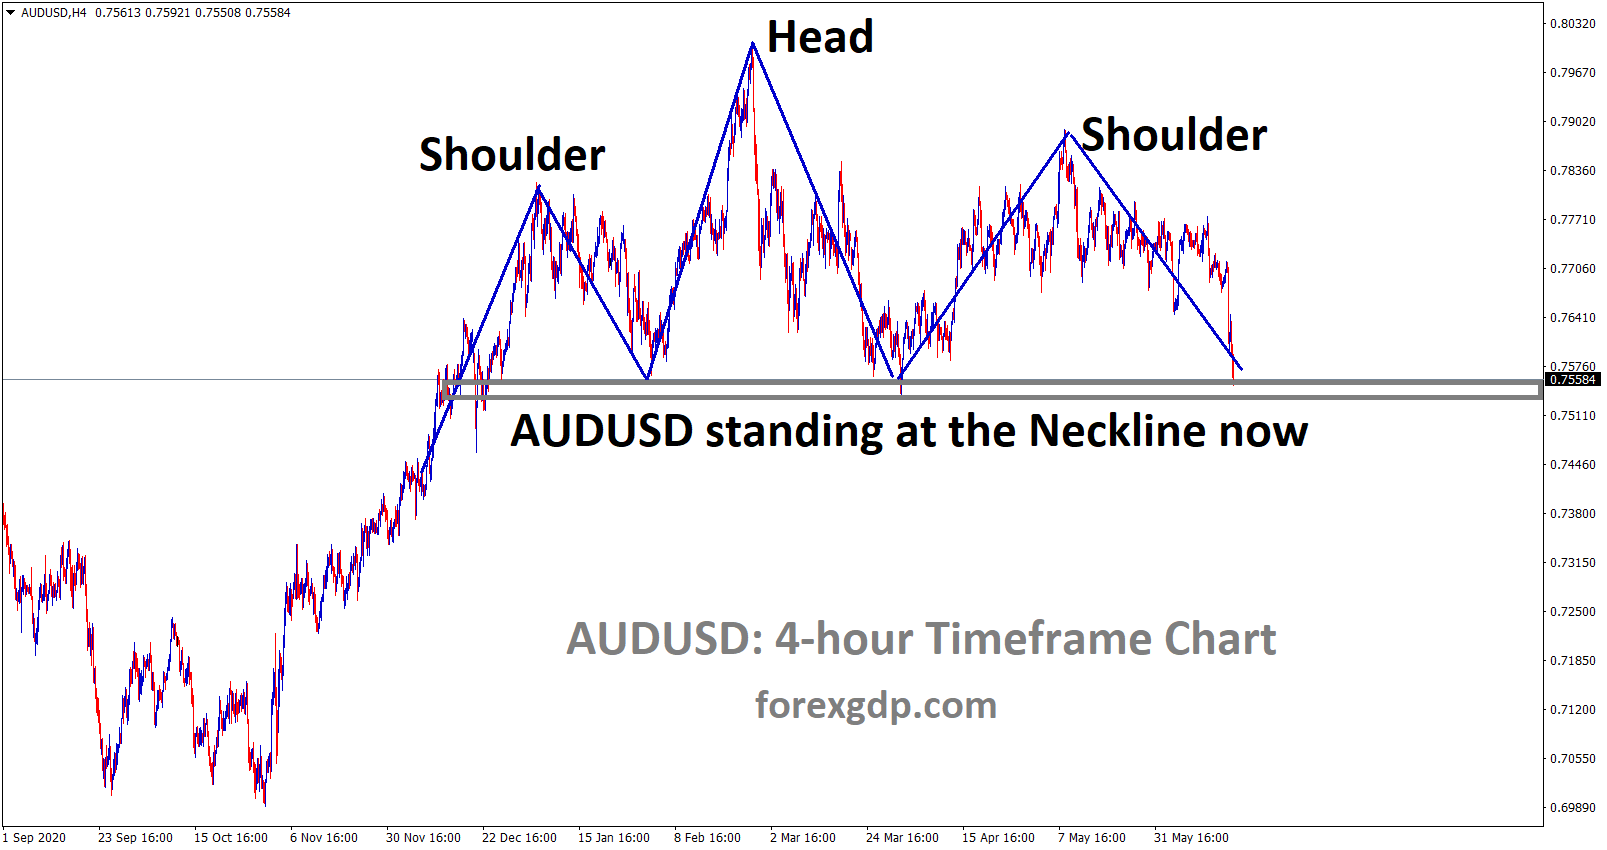 Head and Shoulder pattern formed in AUDUSD. now price reached the neckline of the pattern